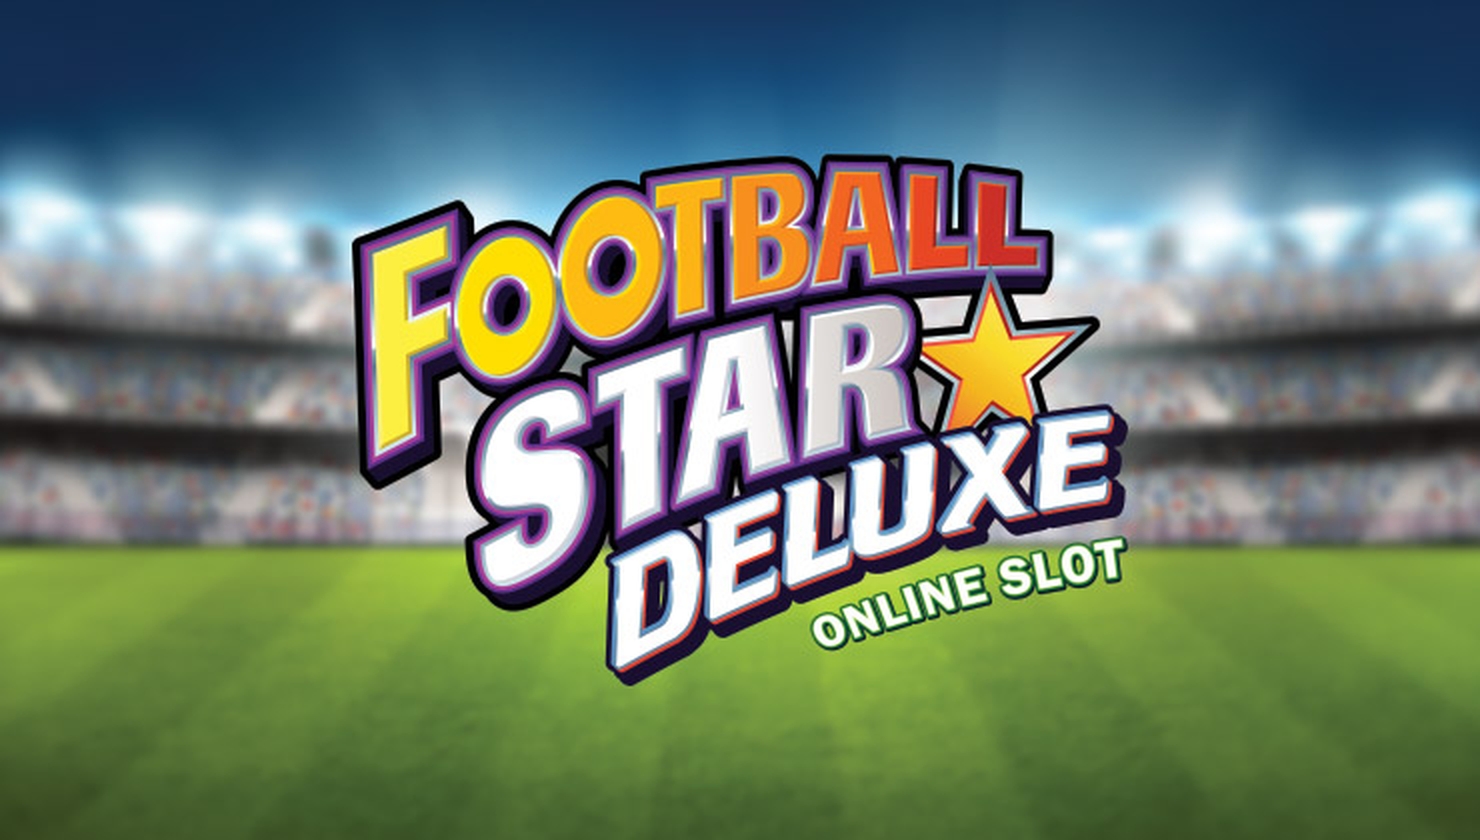 The Football Star Deluxe Online Slot Demo Game by Stormcraft Studios